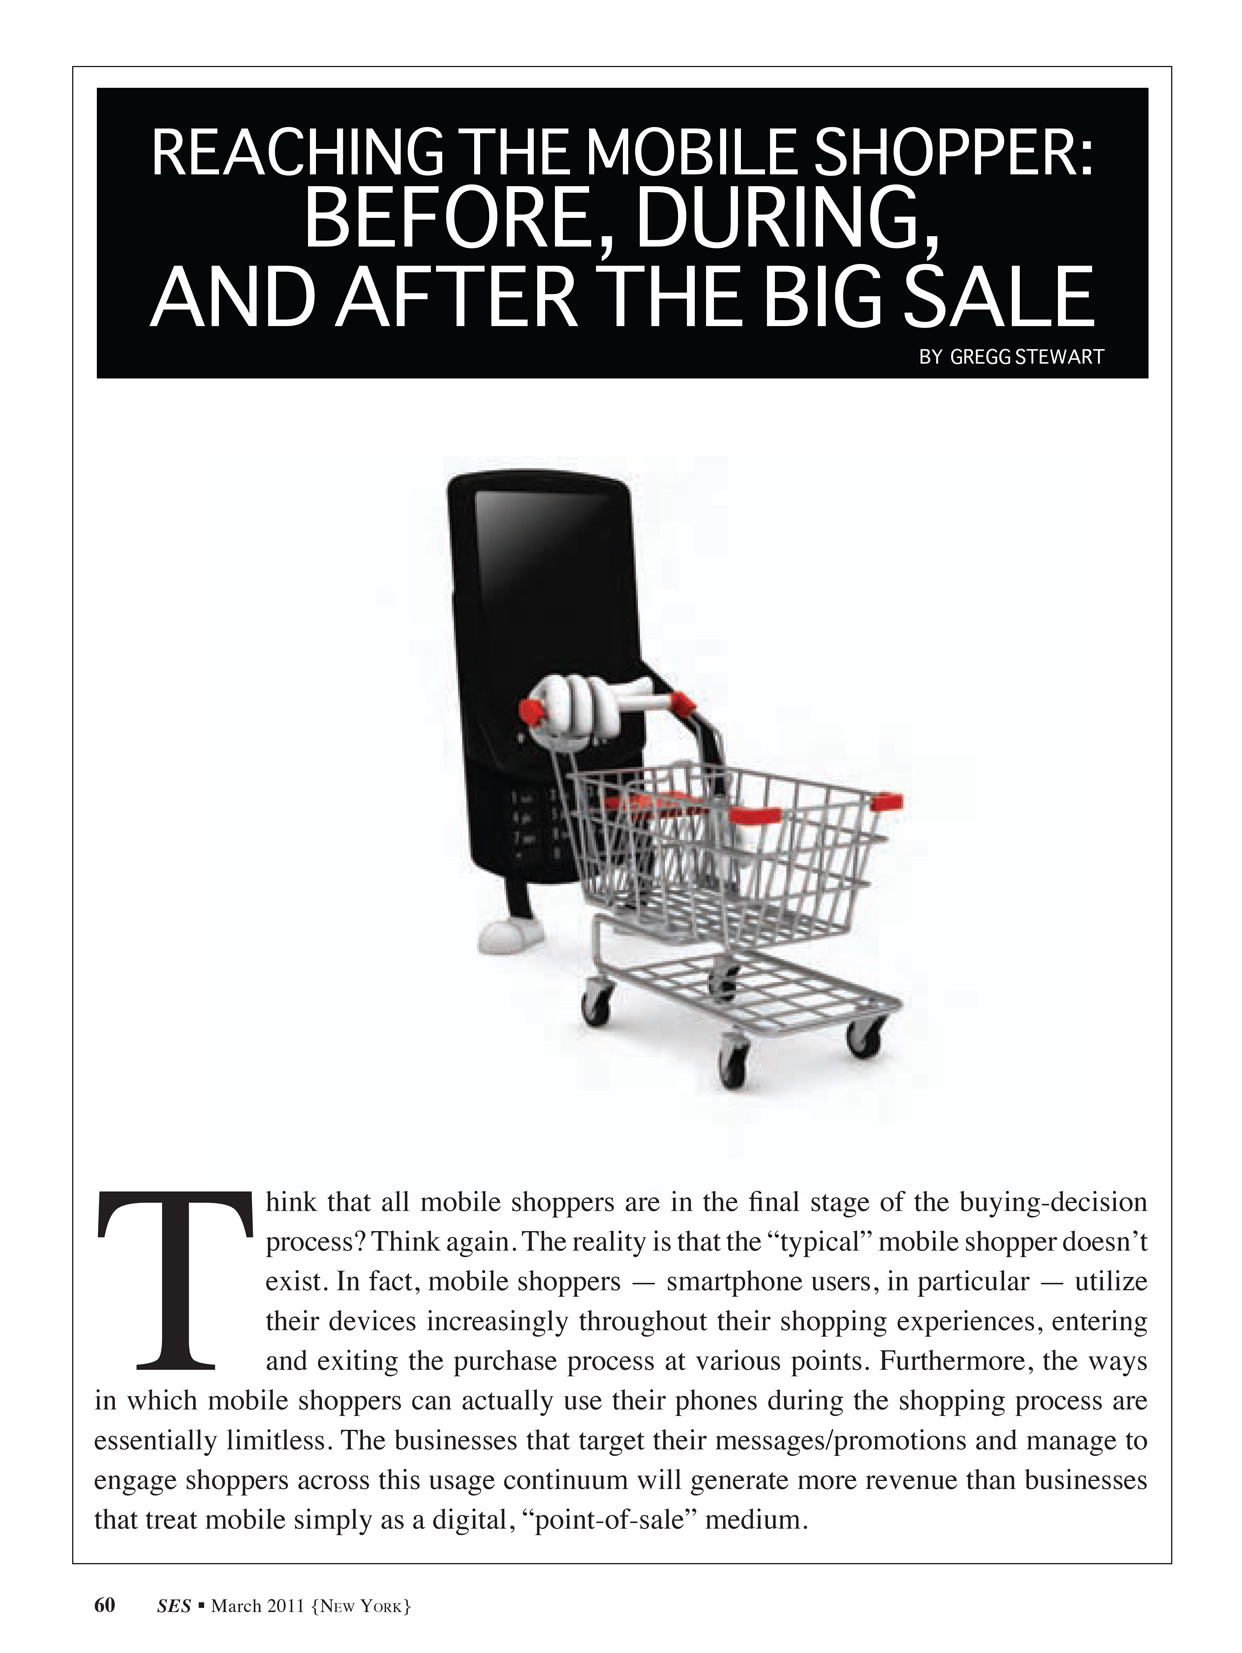 The first page of a feature article that ran in SES Magazine before I redesigned the publication. The article is titled 'Reaching the Mobile Shopper: Before, During, and After the Big Sale.' It shows a stock image of a mobile phone wheeling a shopping cart.